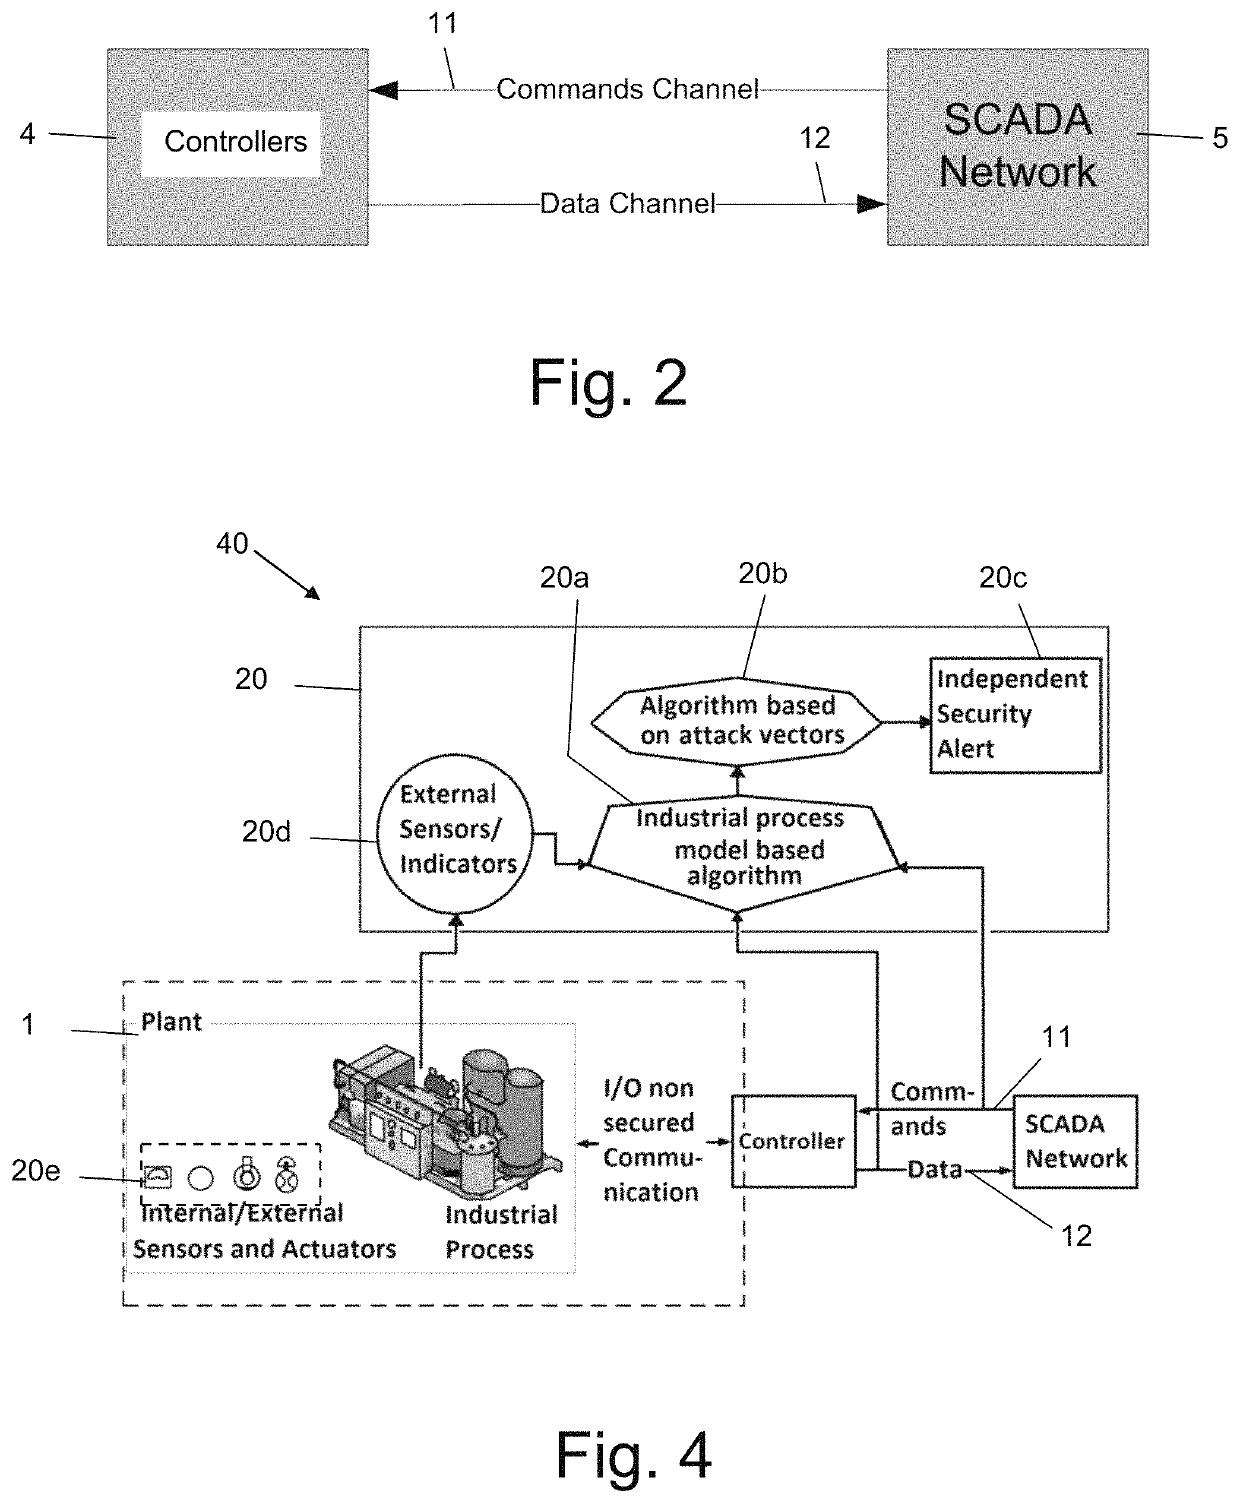 System and method for detecting a cyber-attack at SCADA/ICS managed plants